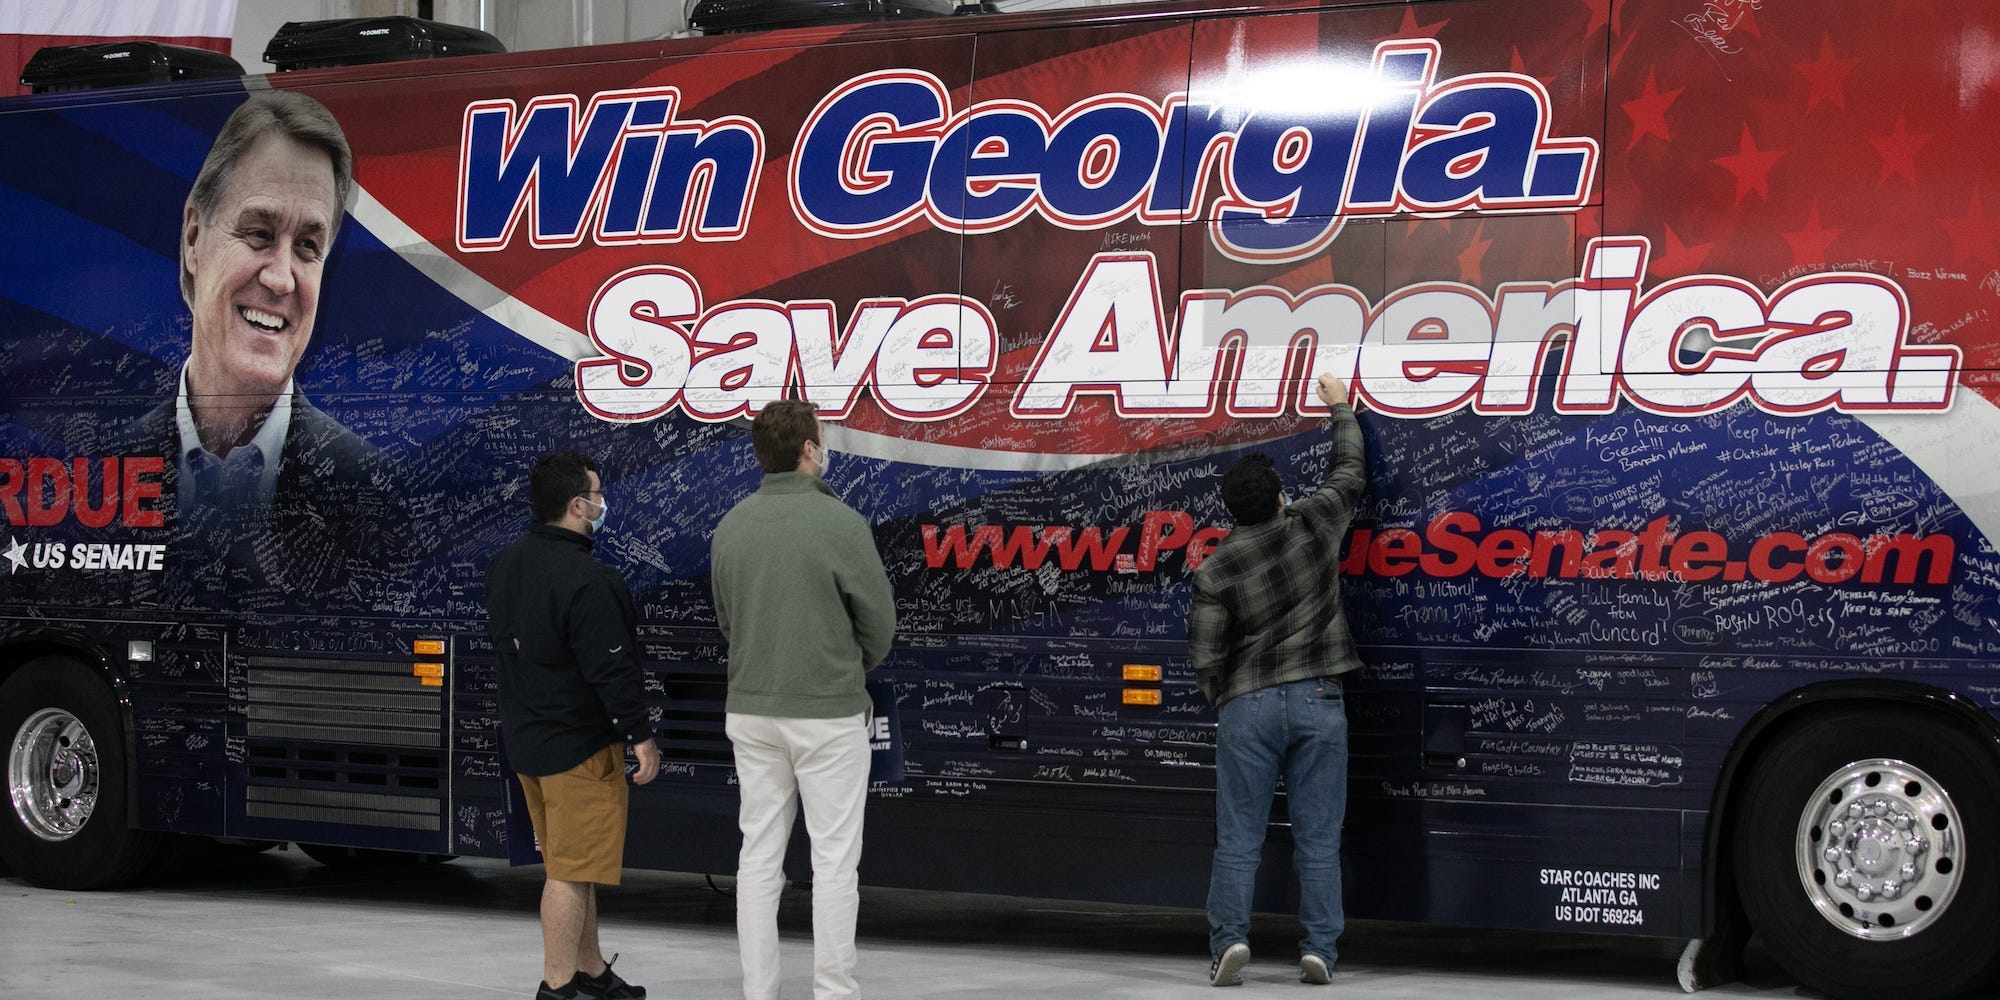 Supporters sign the campaign bus for Sen. David Perdue (R-GA) during a campaign rally at Peachtree Dekalb Airport on December 14, 2020 in Atlanta, Georgia